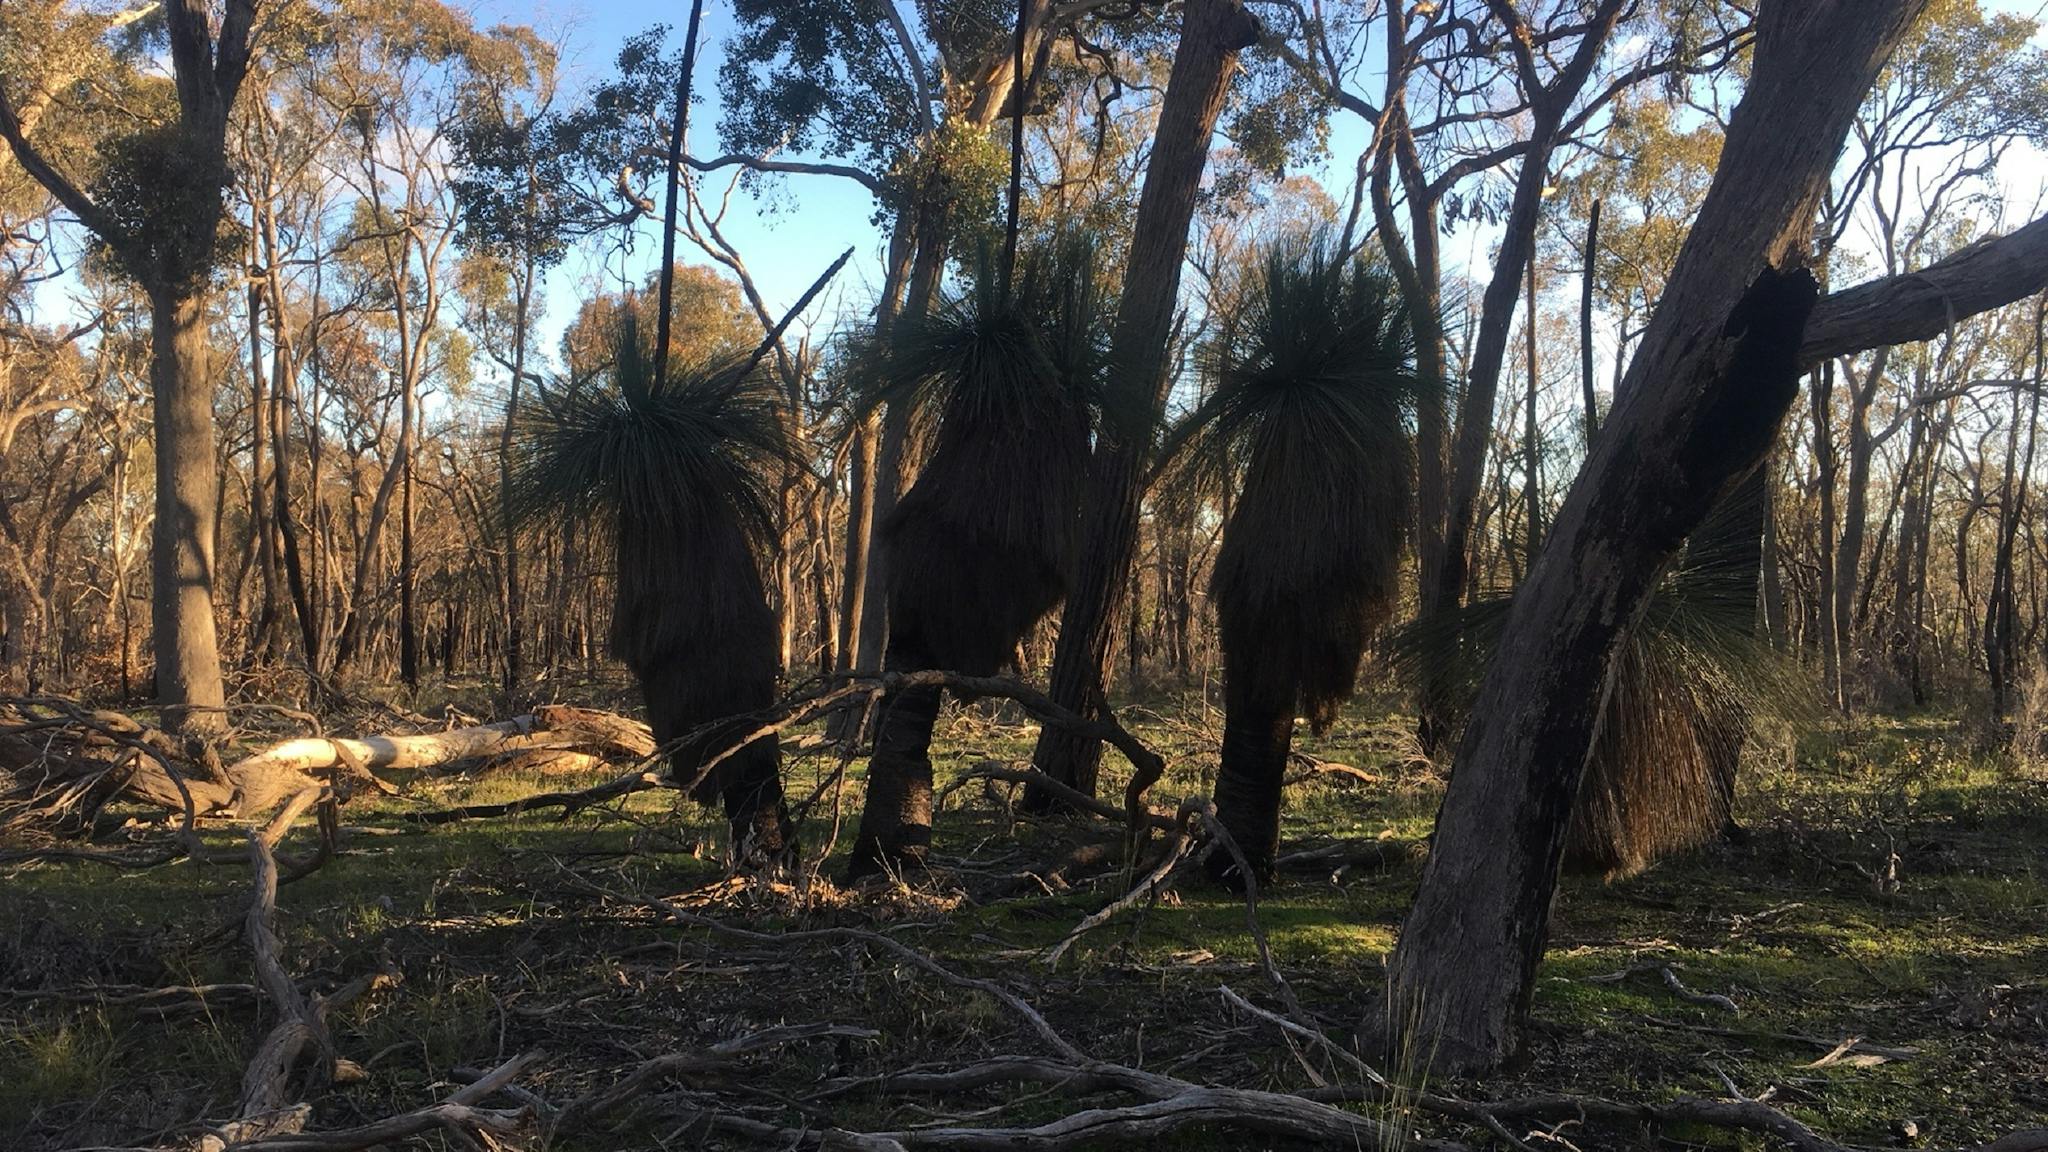 grass trees, gum trees, dead branches on ground, sunny day, blue skies.